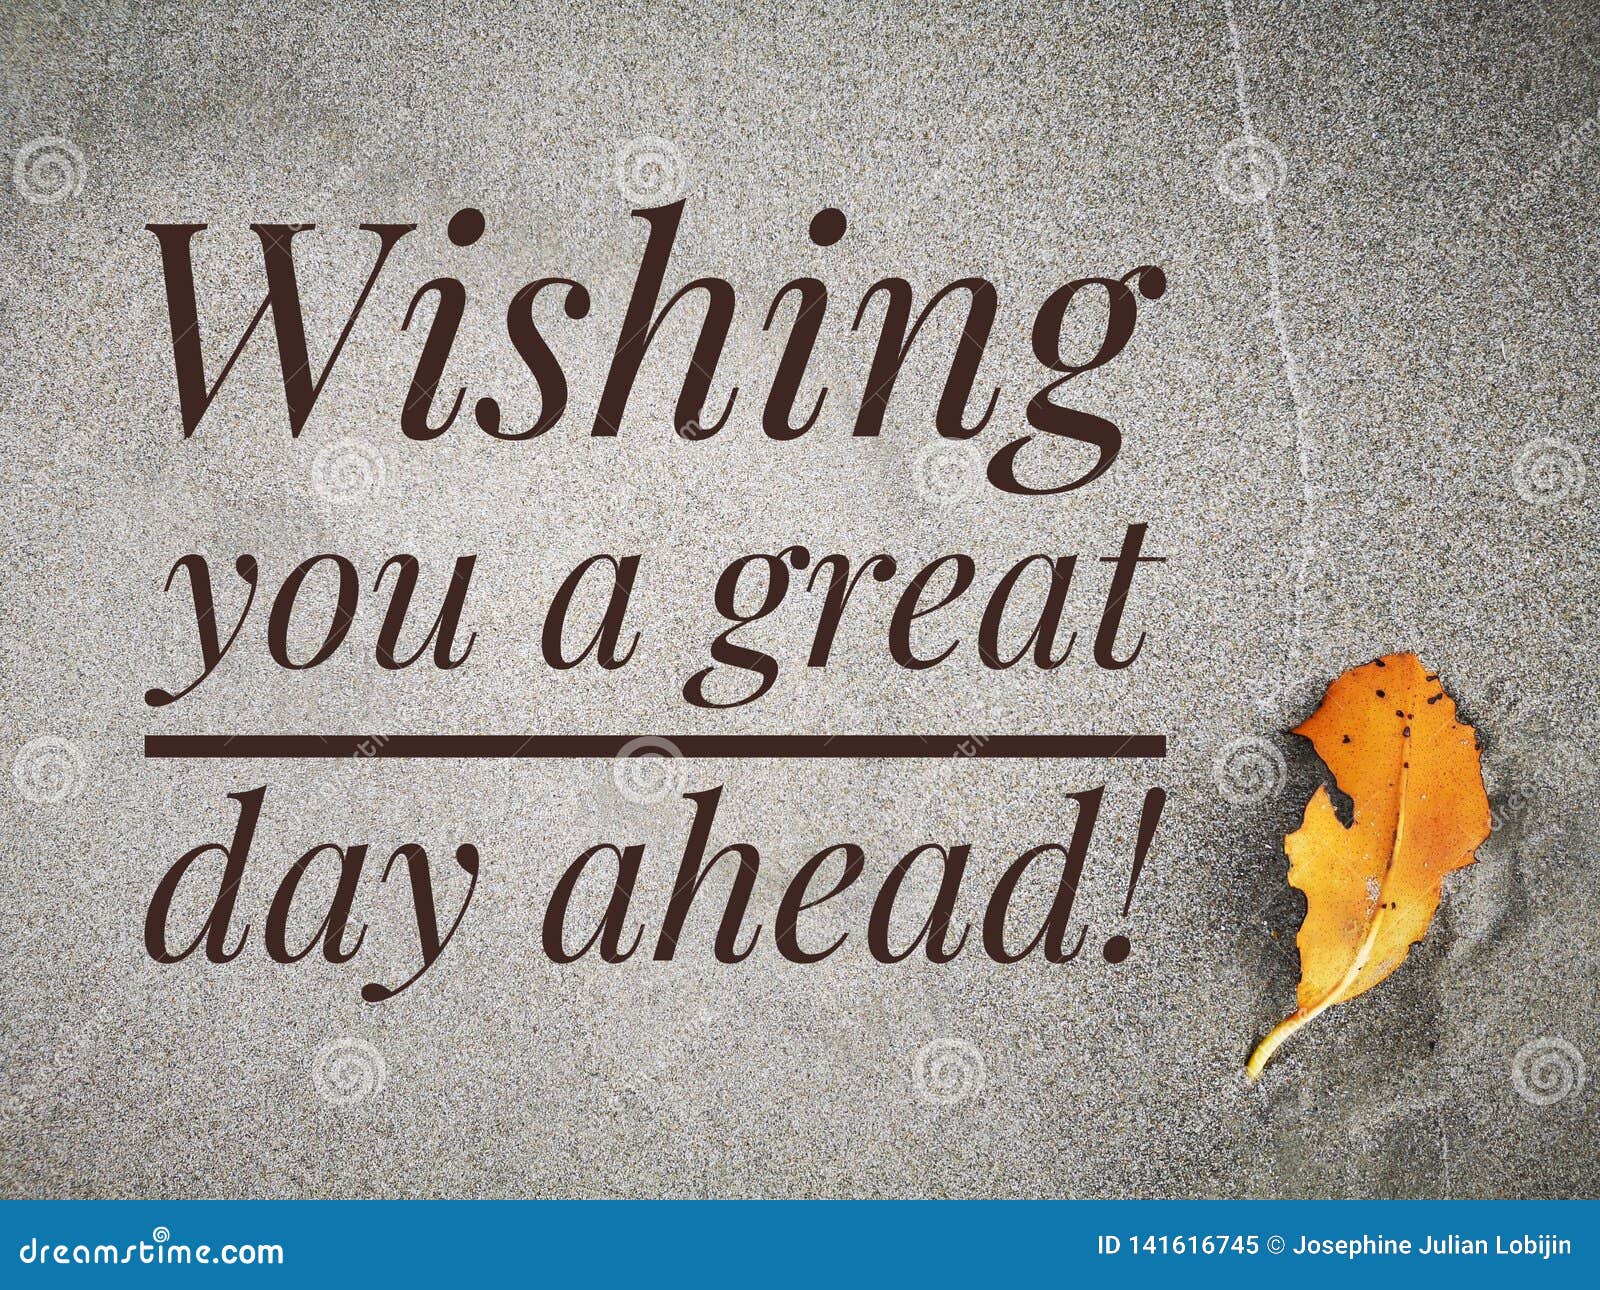 Wishing You A Great Day Ahead Quote For Daily Quote Stock Image